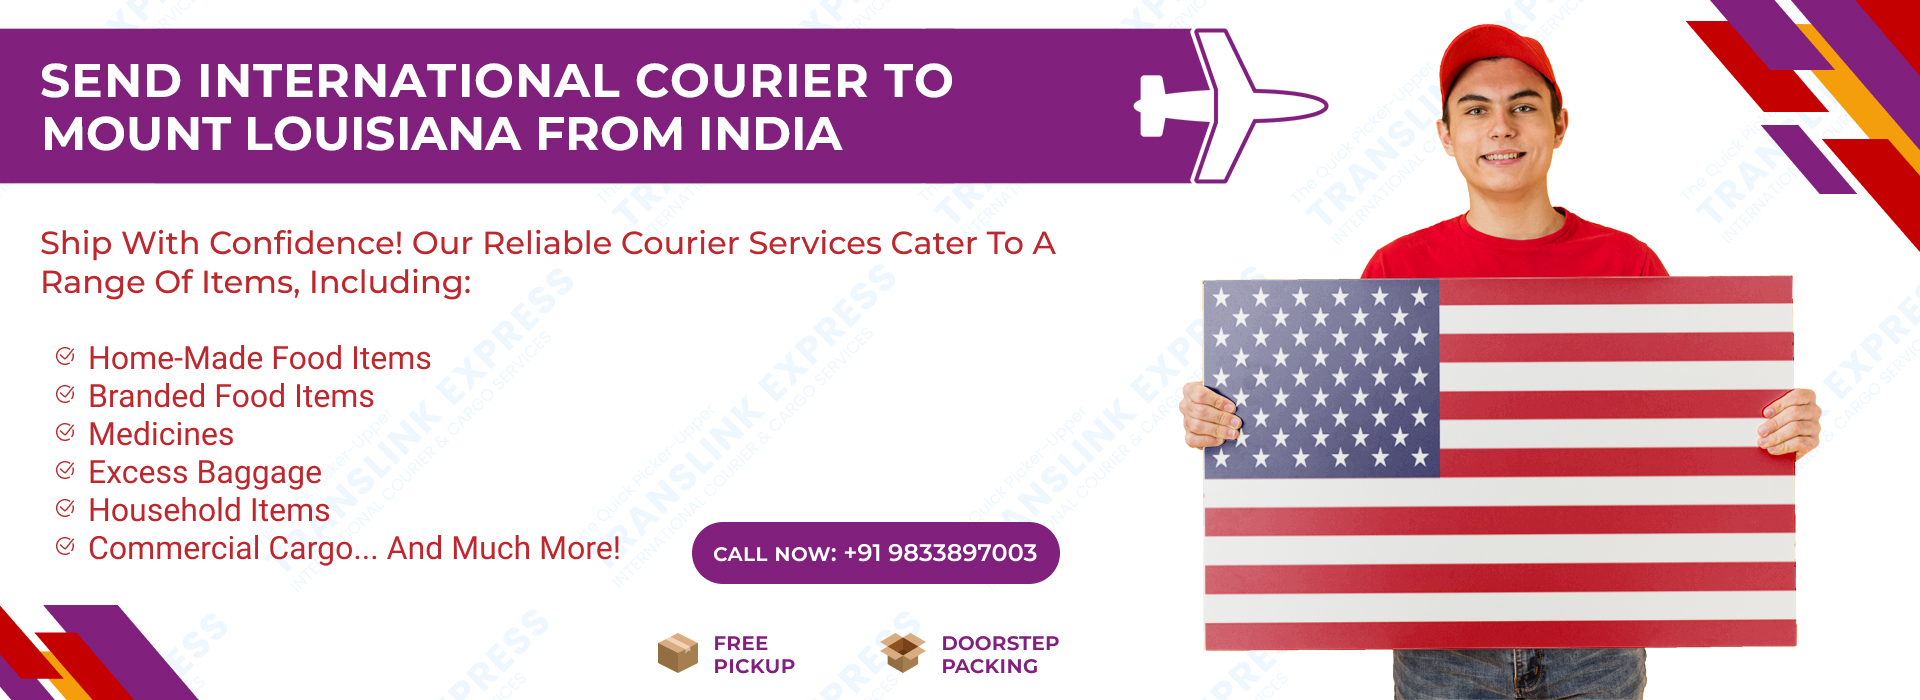 Courier to Mount Louisiana From India